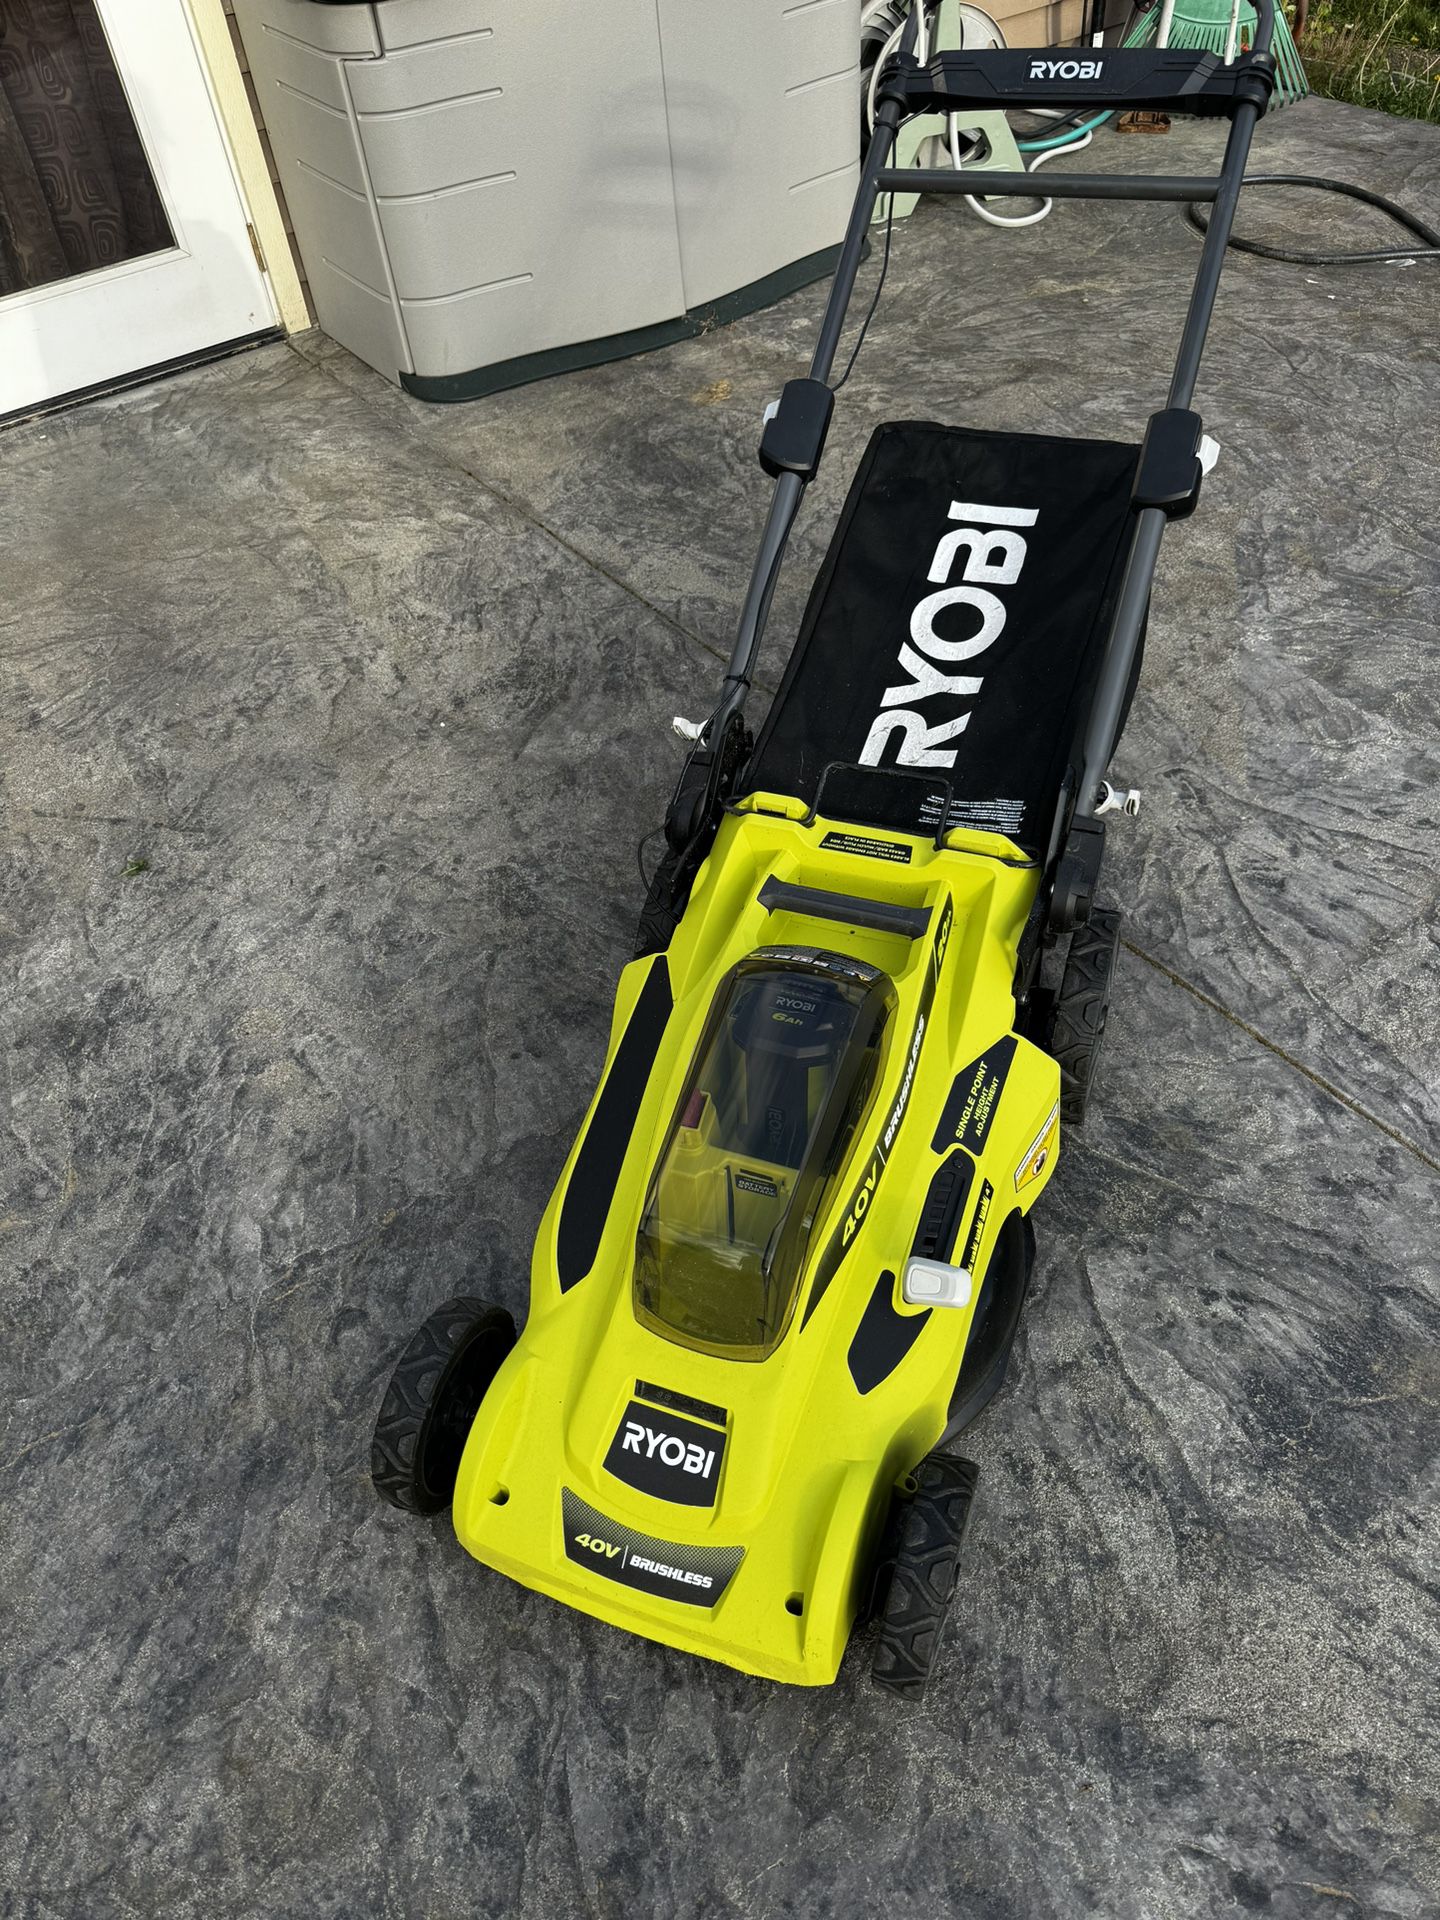 Ryobi 40v Battery Lawn Mower - Comes With 1 40v 6Amp Battery And Charger 